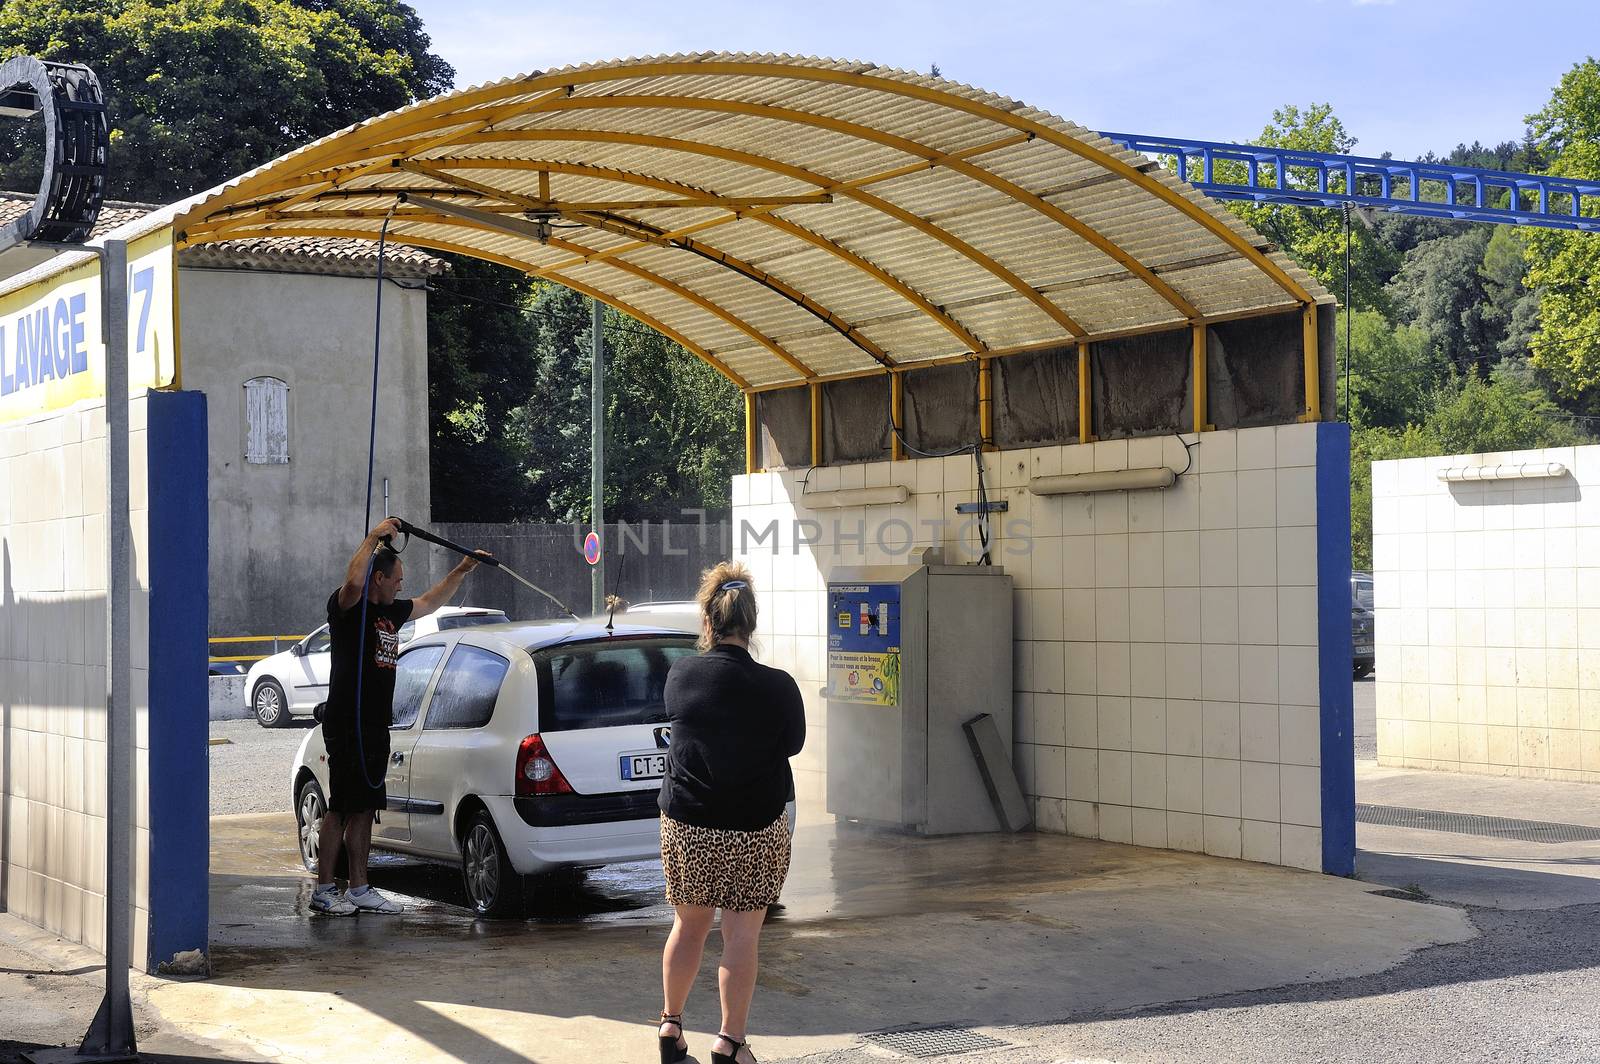 Car wash where customers themselves wash their cars with high-pressure jets free service.